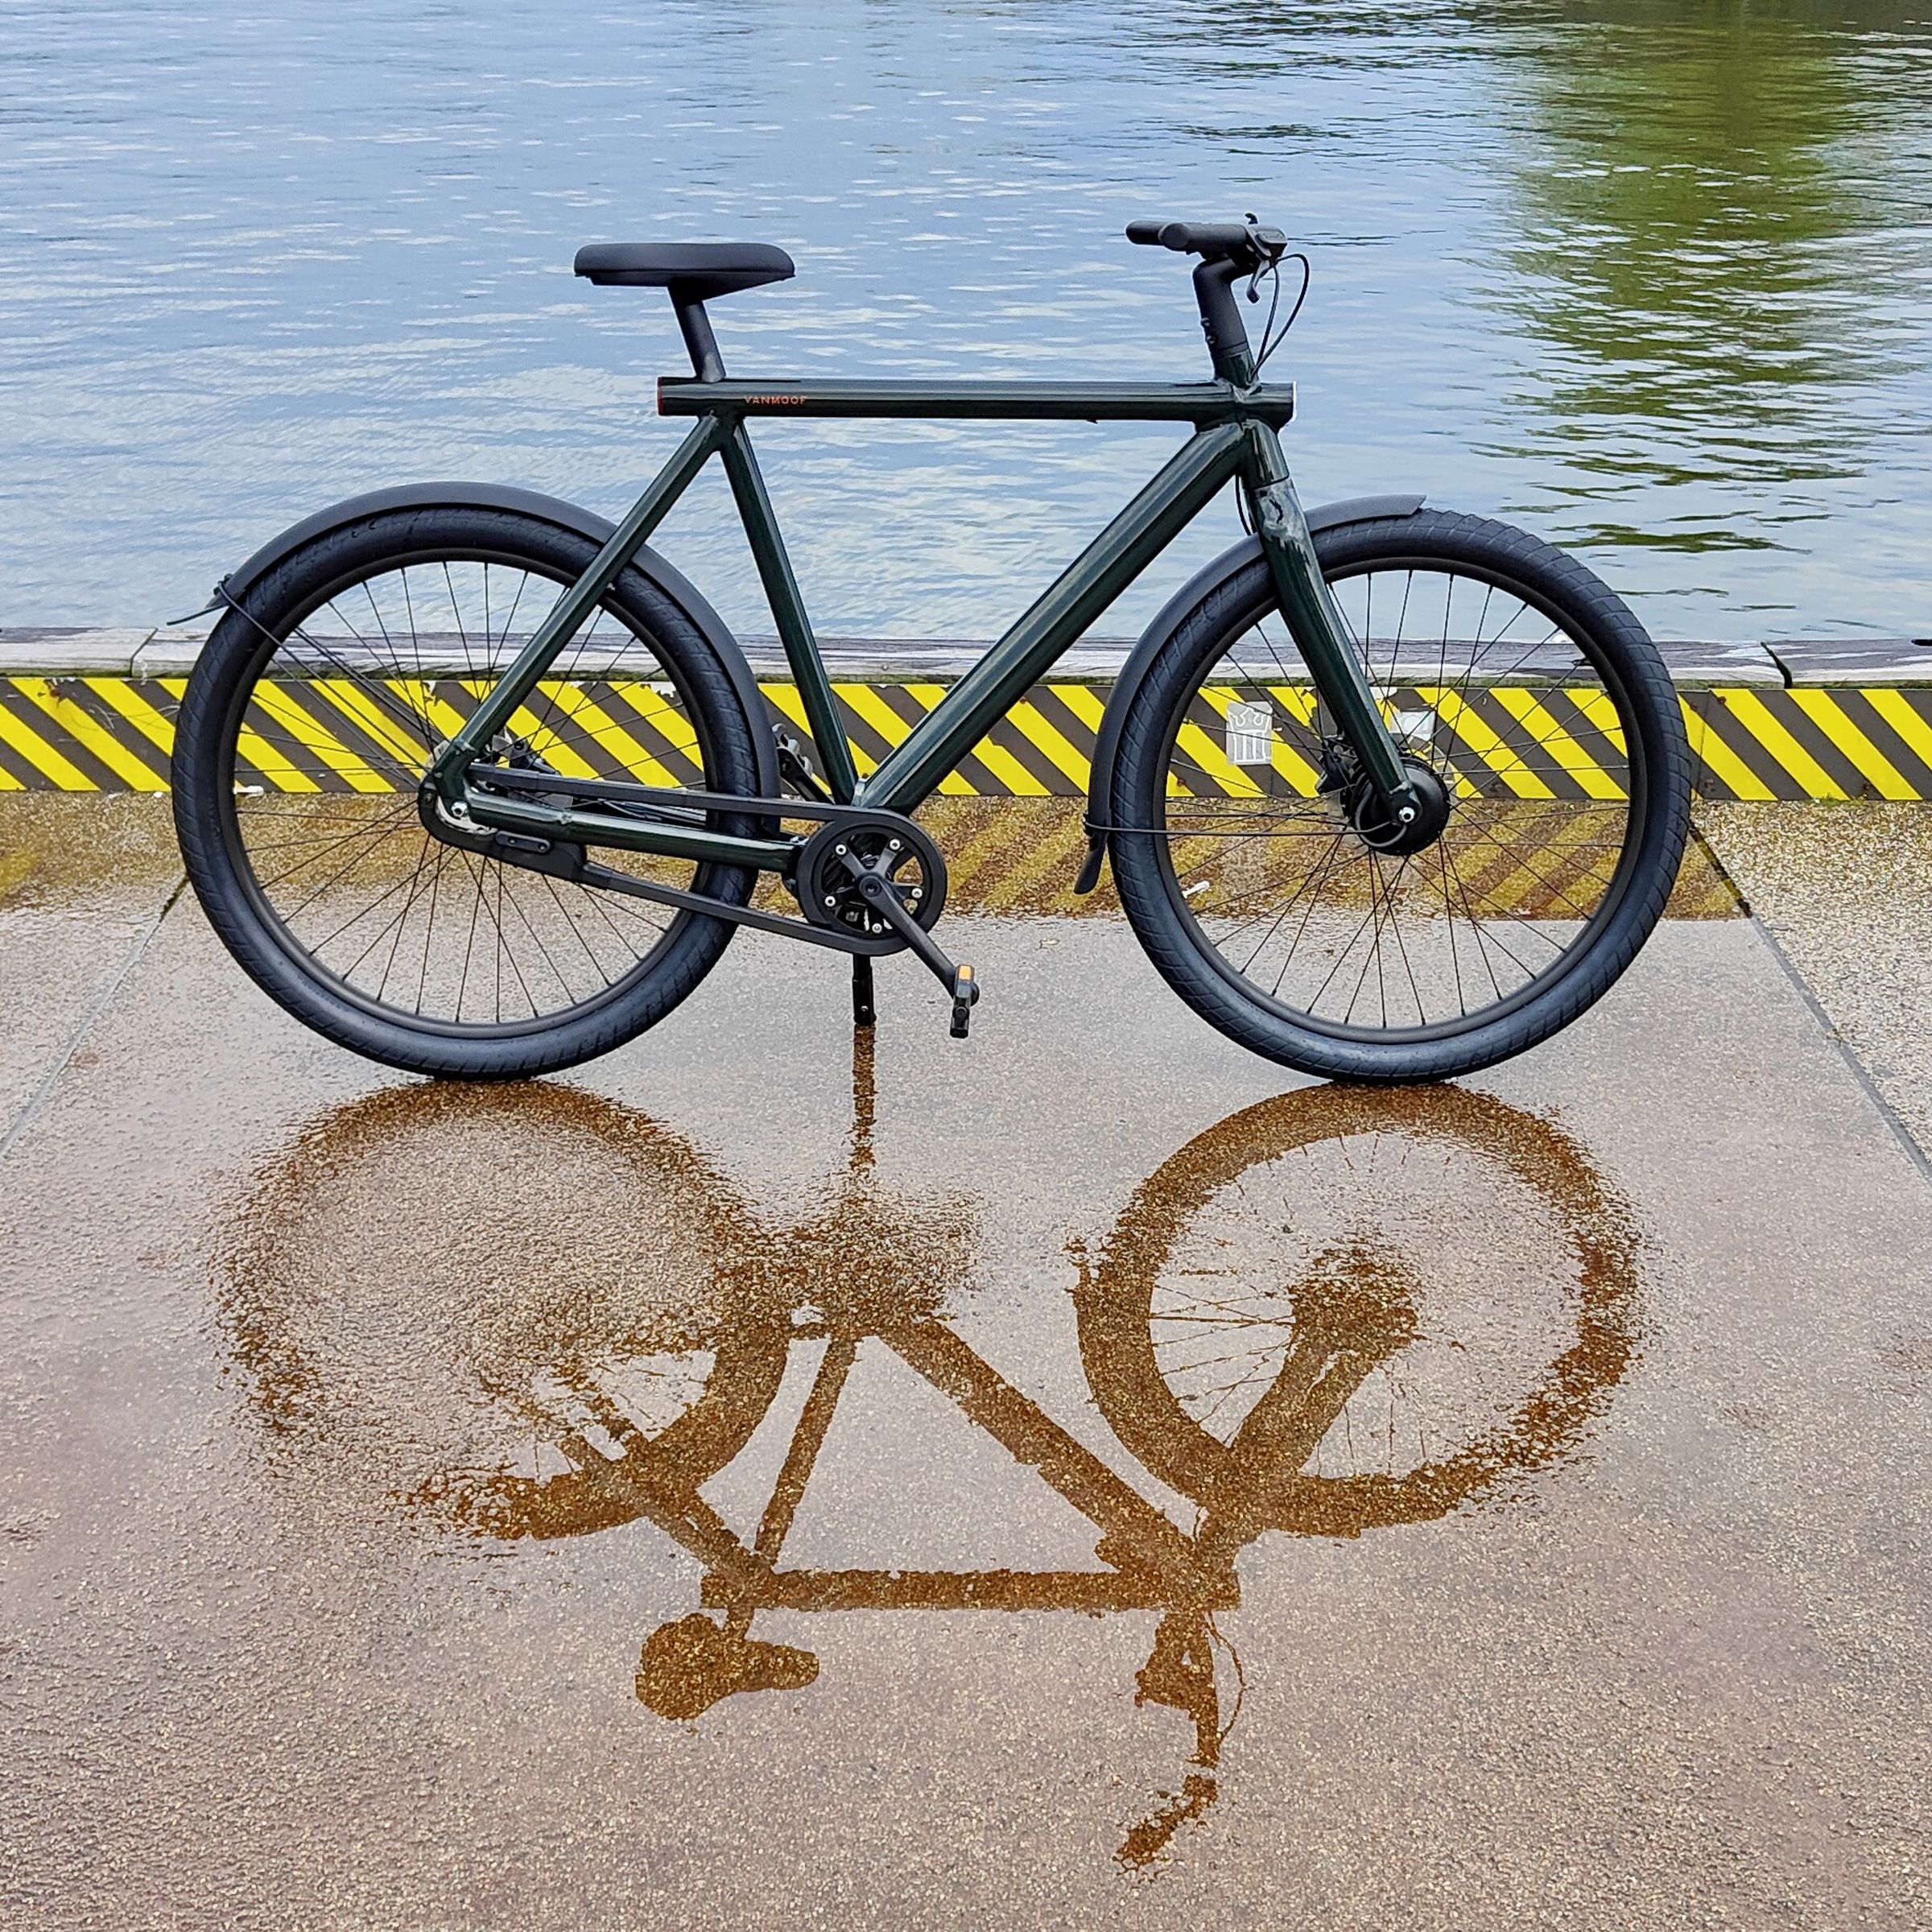 A dark green VanMoof S4 e-bike stands on a wet concrete platform surrounded by water and yellow and black warning paint around the platform’s permitter. The bicycle is reflected in the wet concrete.